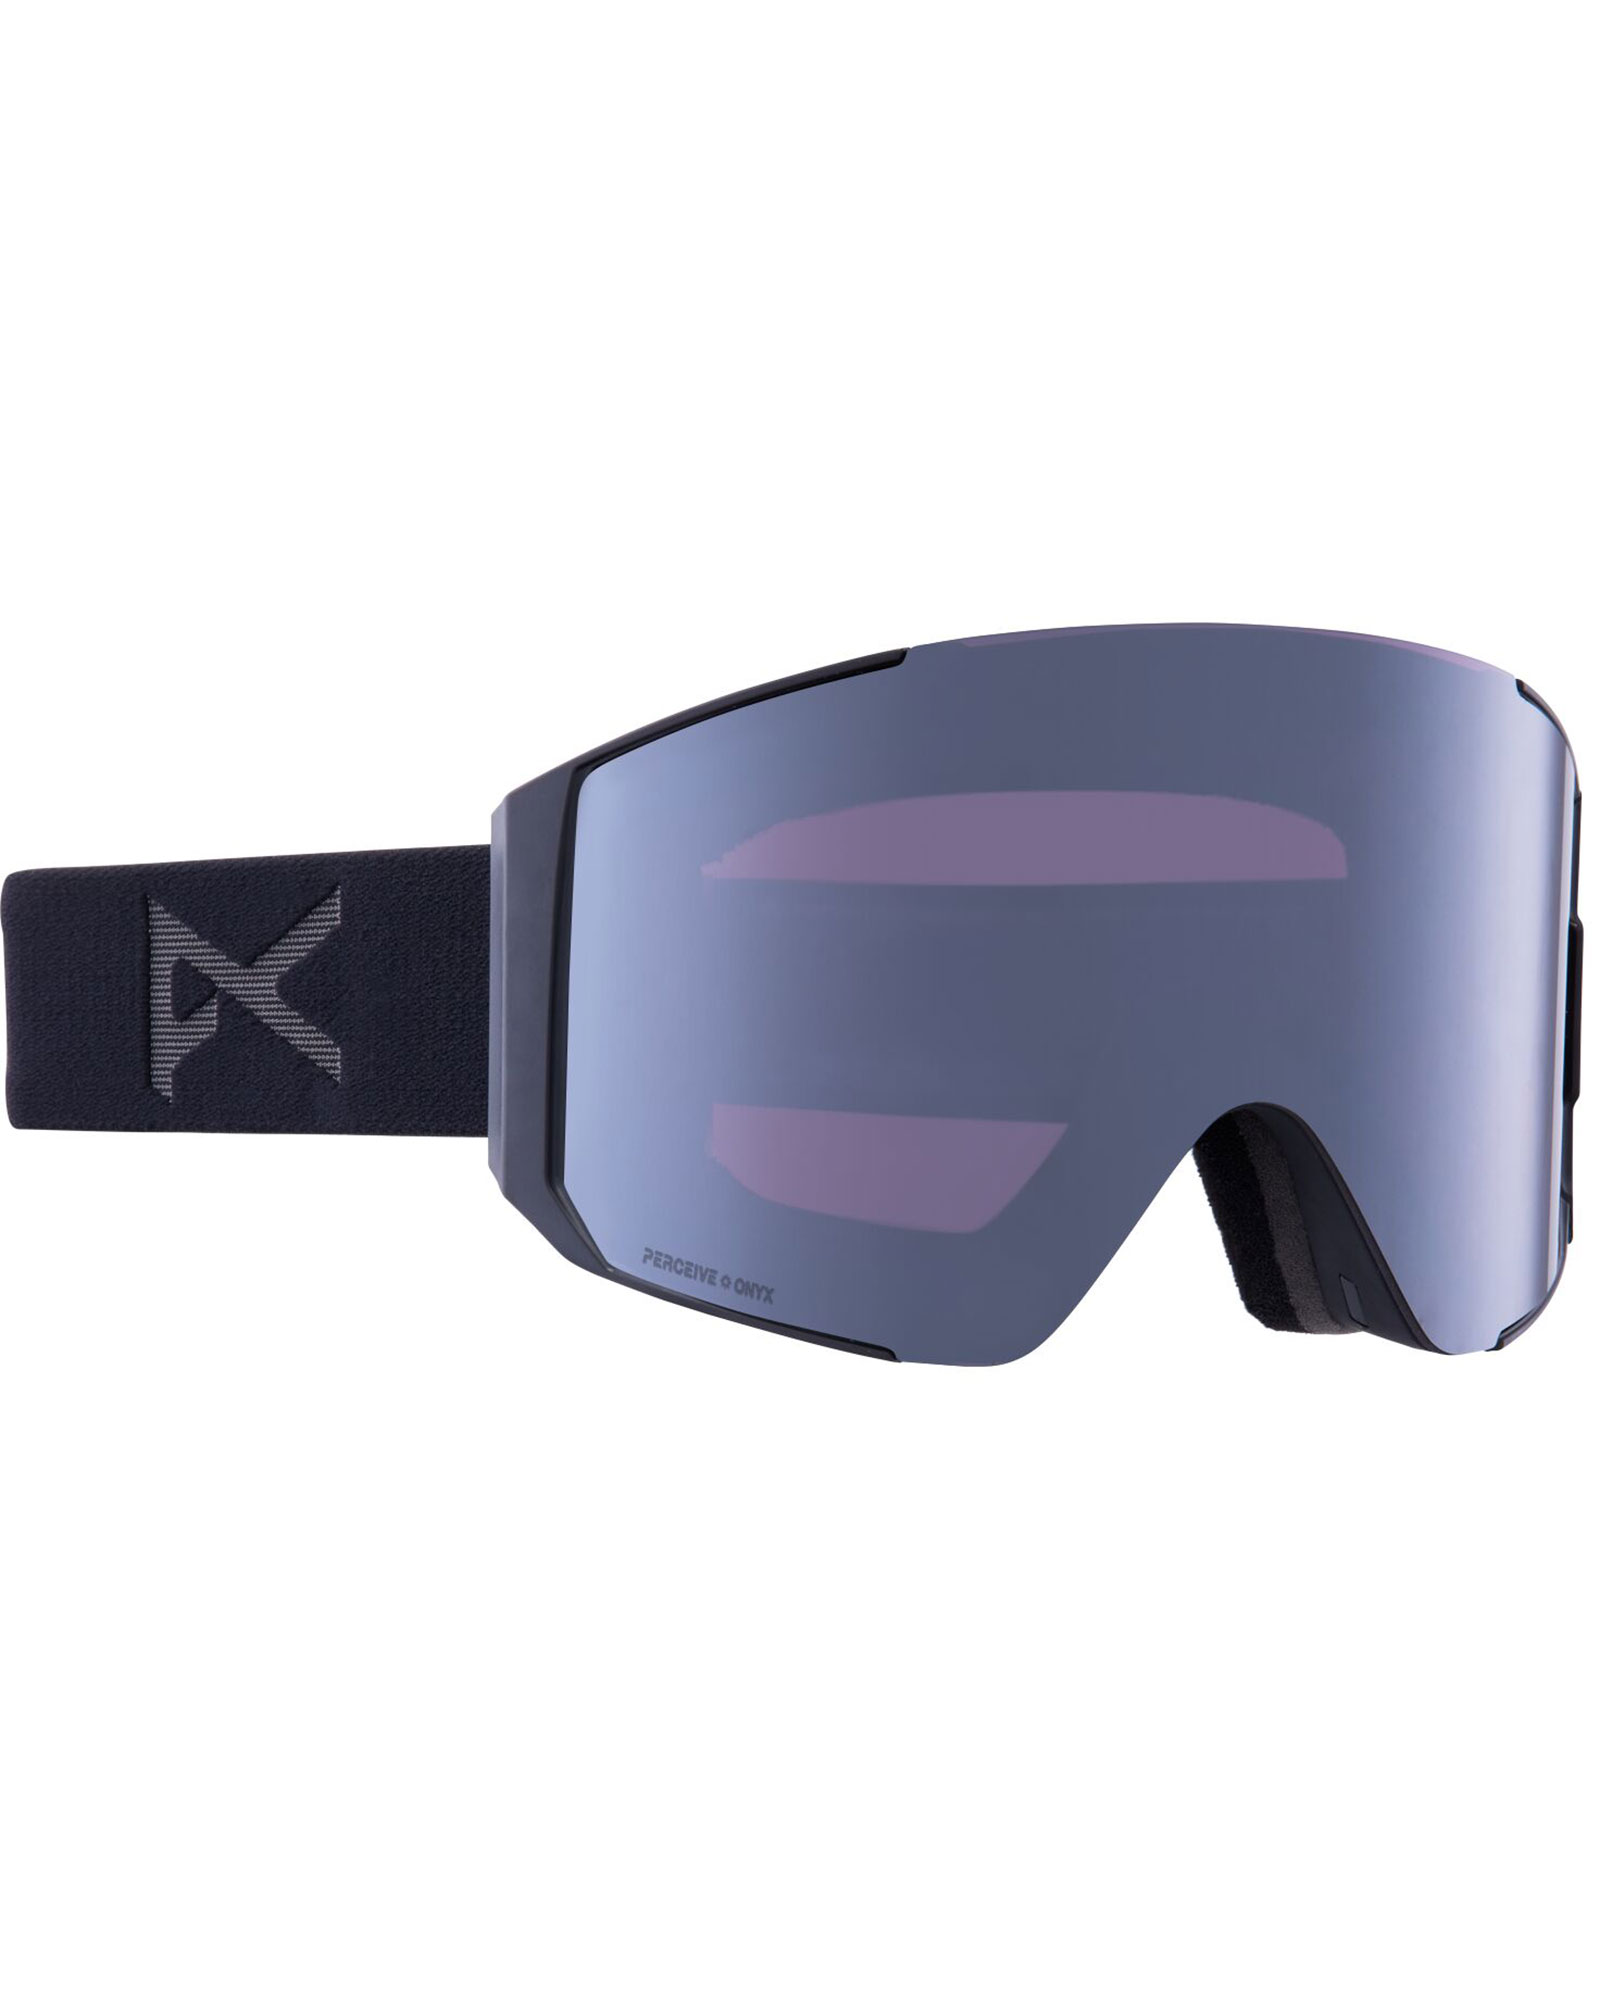 Anon Smoke / Perceive Sunny Onyx + Perceive Variable Violet Goggles 0